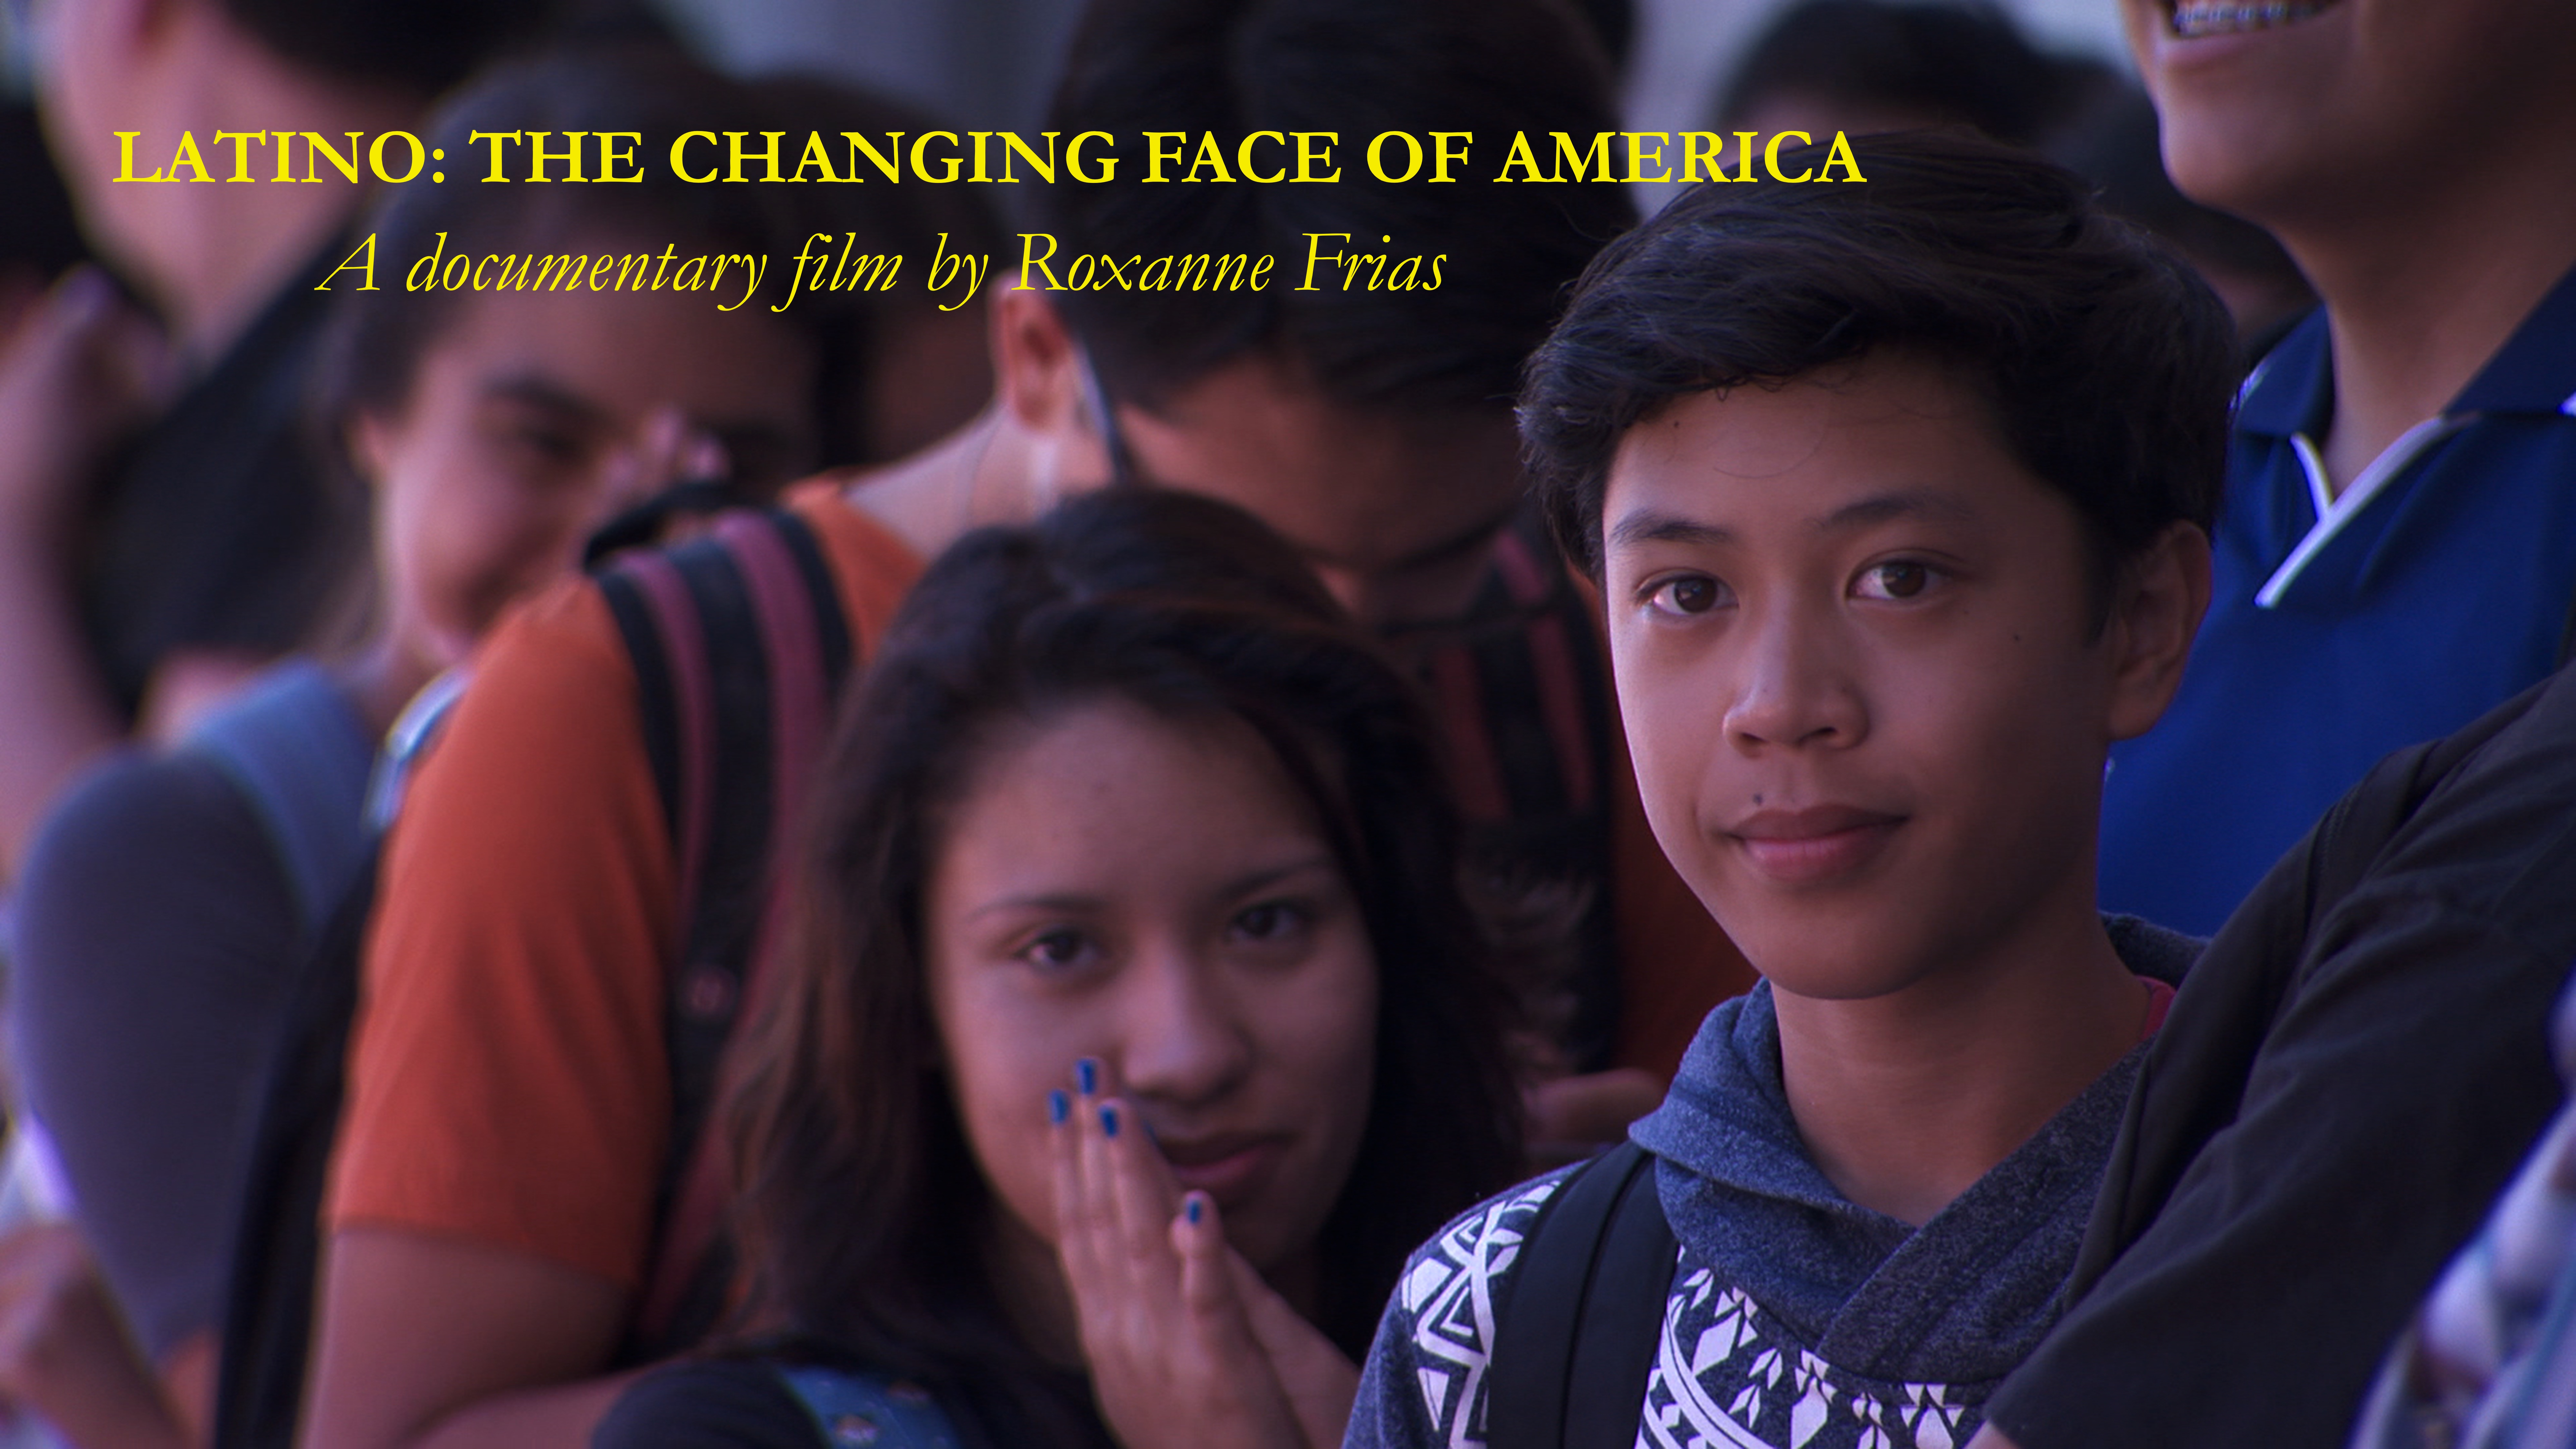 Projection “Latino, the changing face of America” le 10 janvier